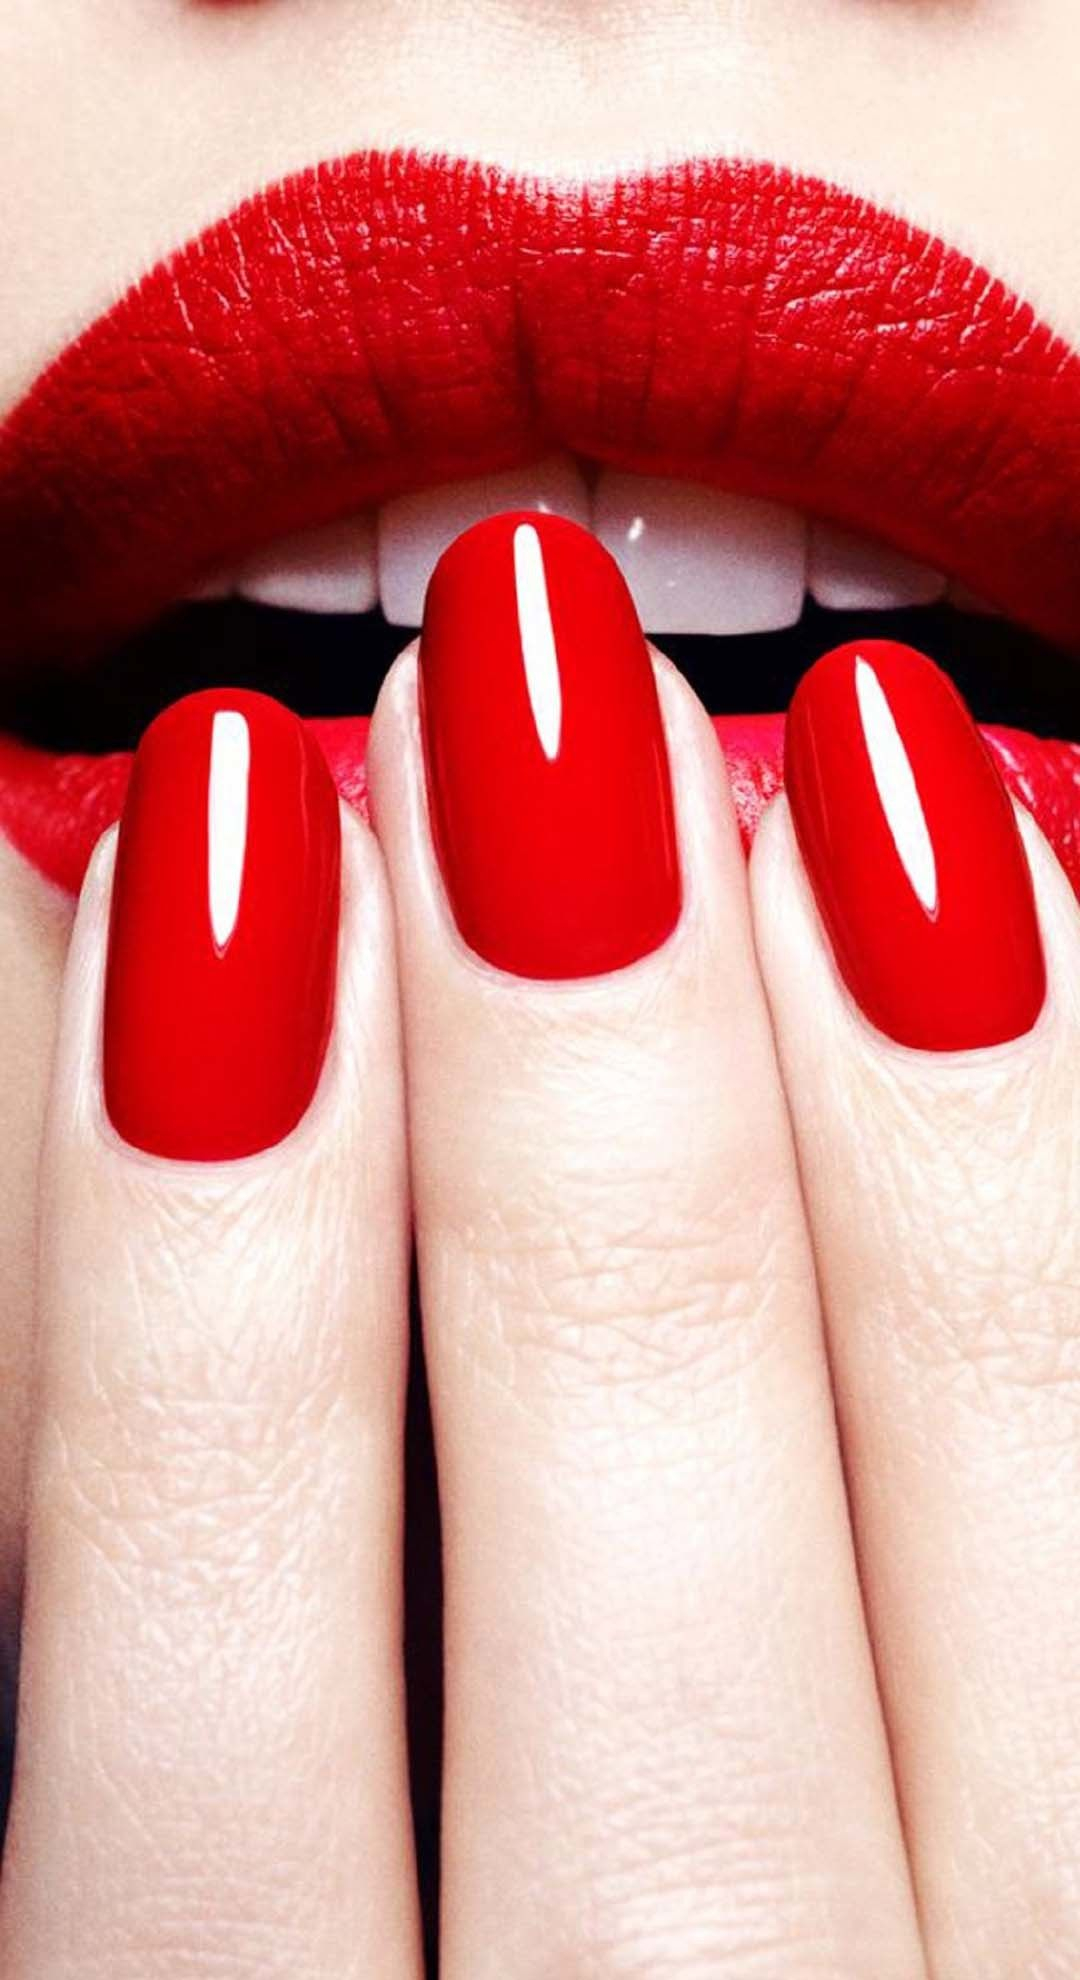 1080x1980 Nails Wallpaper for iphone 5s | Red nails, Hair and nails, Glitter lips